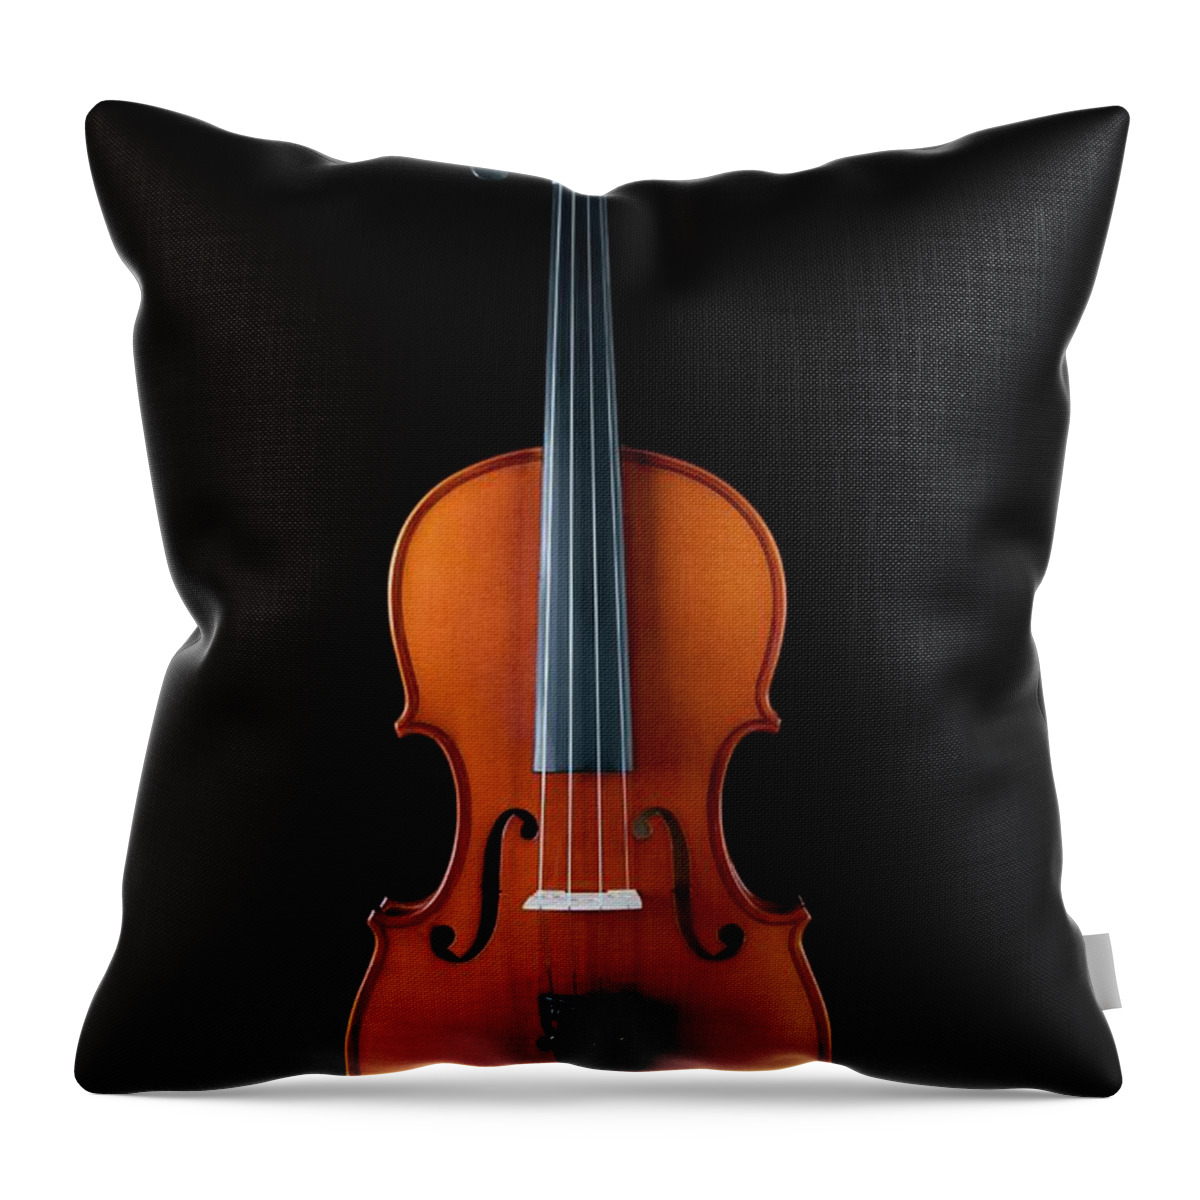 Black Color Throw Pillow featuring the photograph Violin by Junior Gonzalez